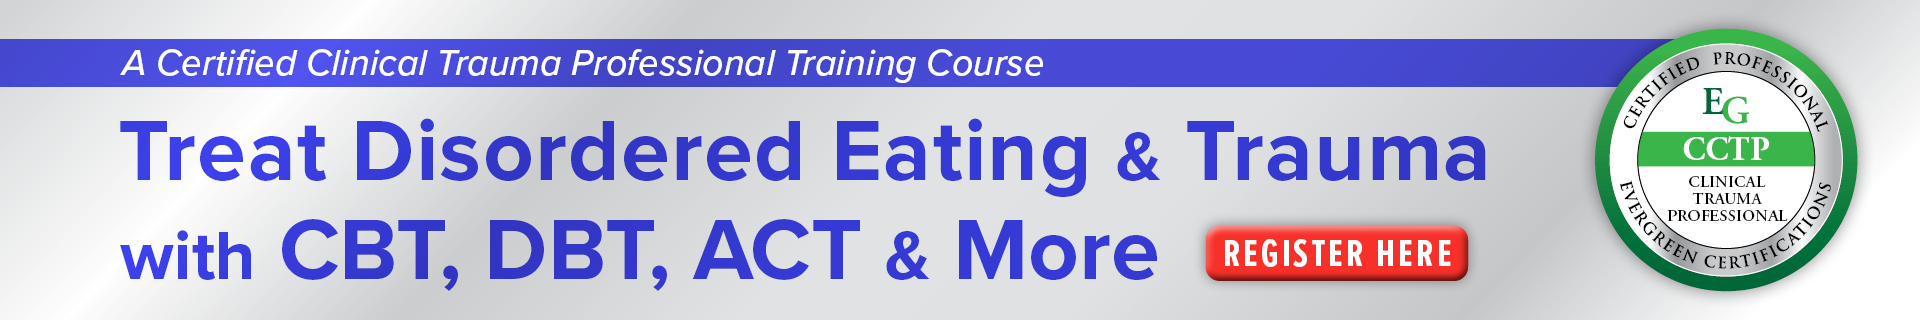 Treat Disordered Eating & Trauma with CBT, DBT, ACT & More: A Certified Clinical Trauma Professional Training Course